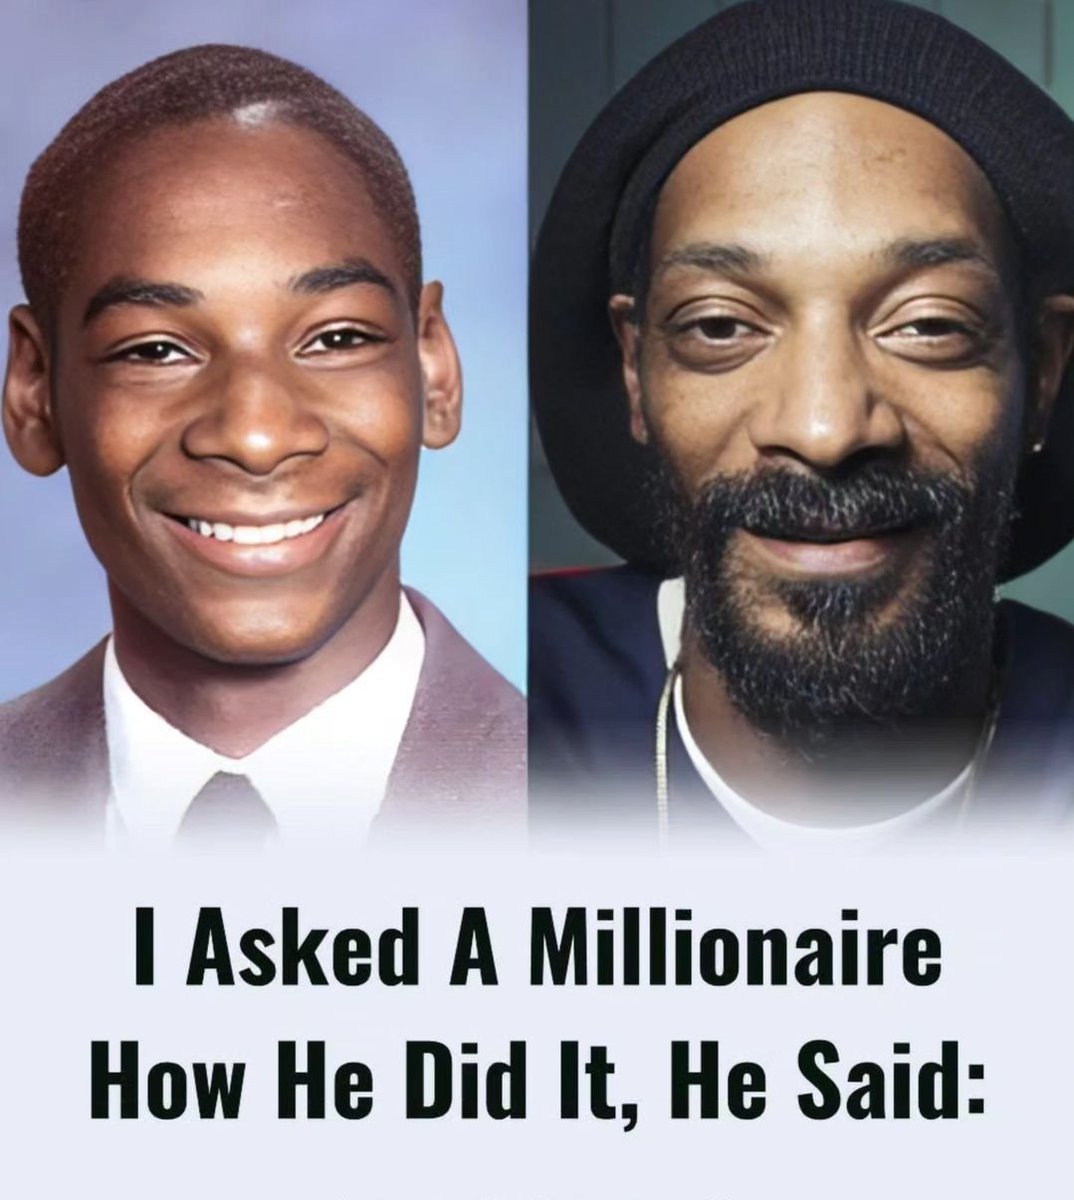 I asked a millionaire how he did it, he said...